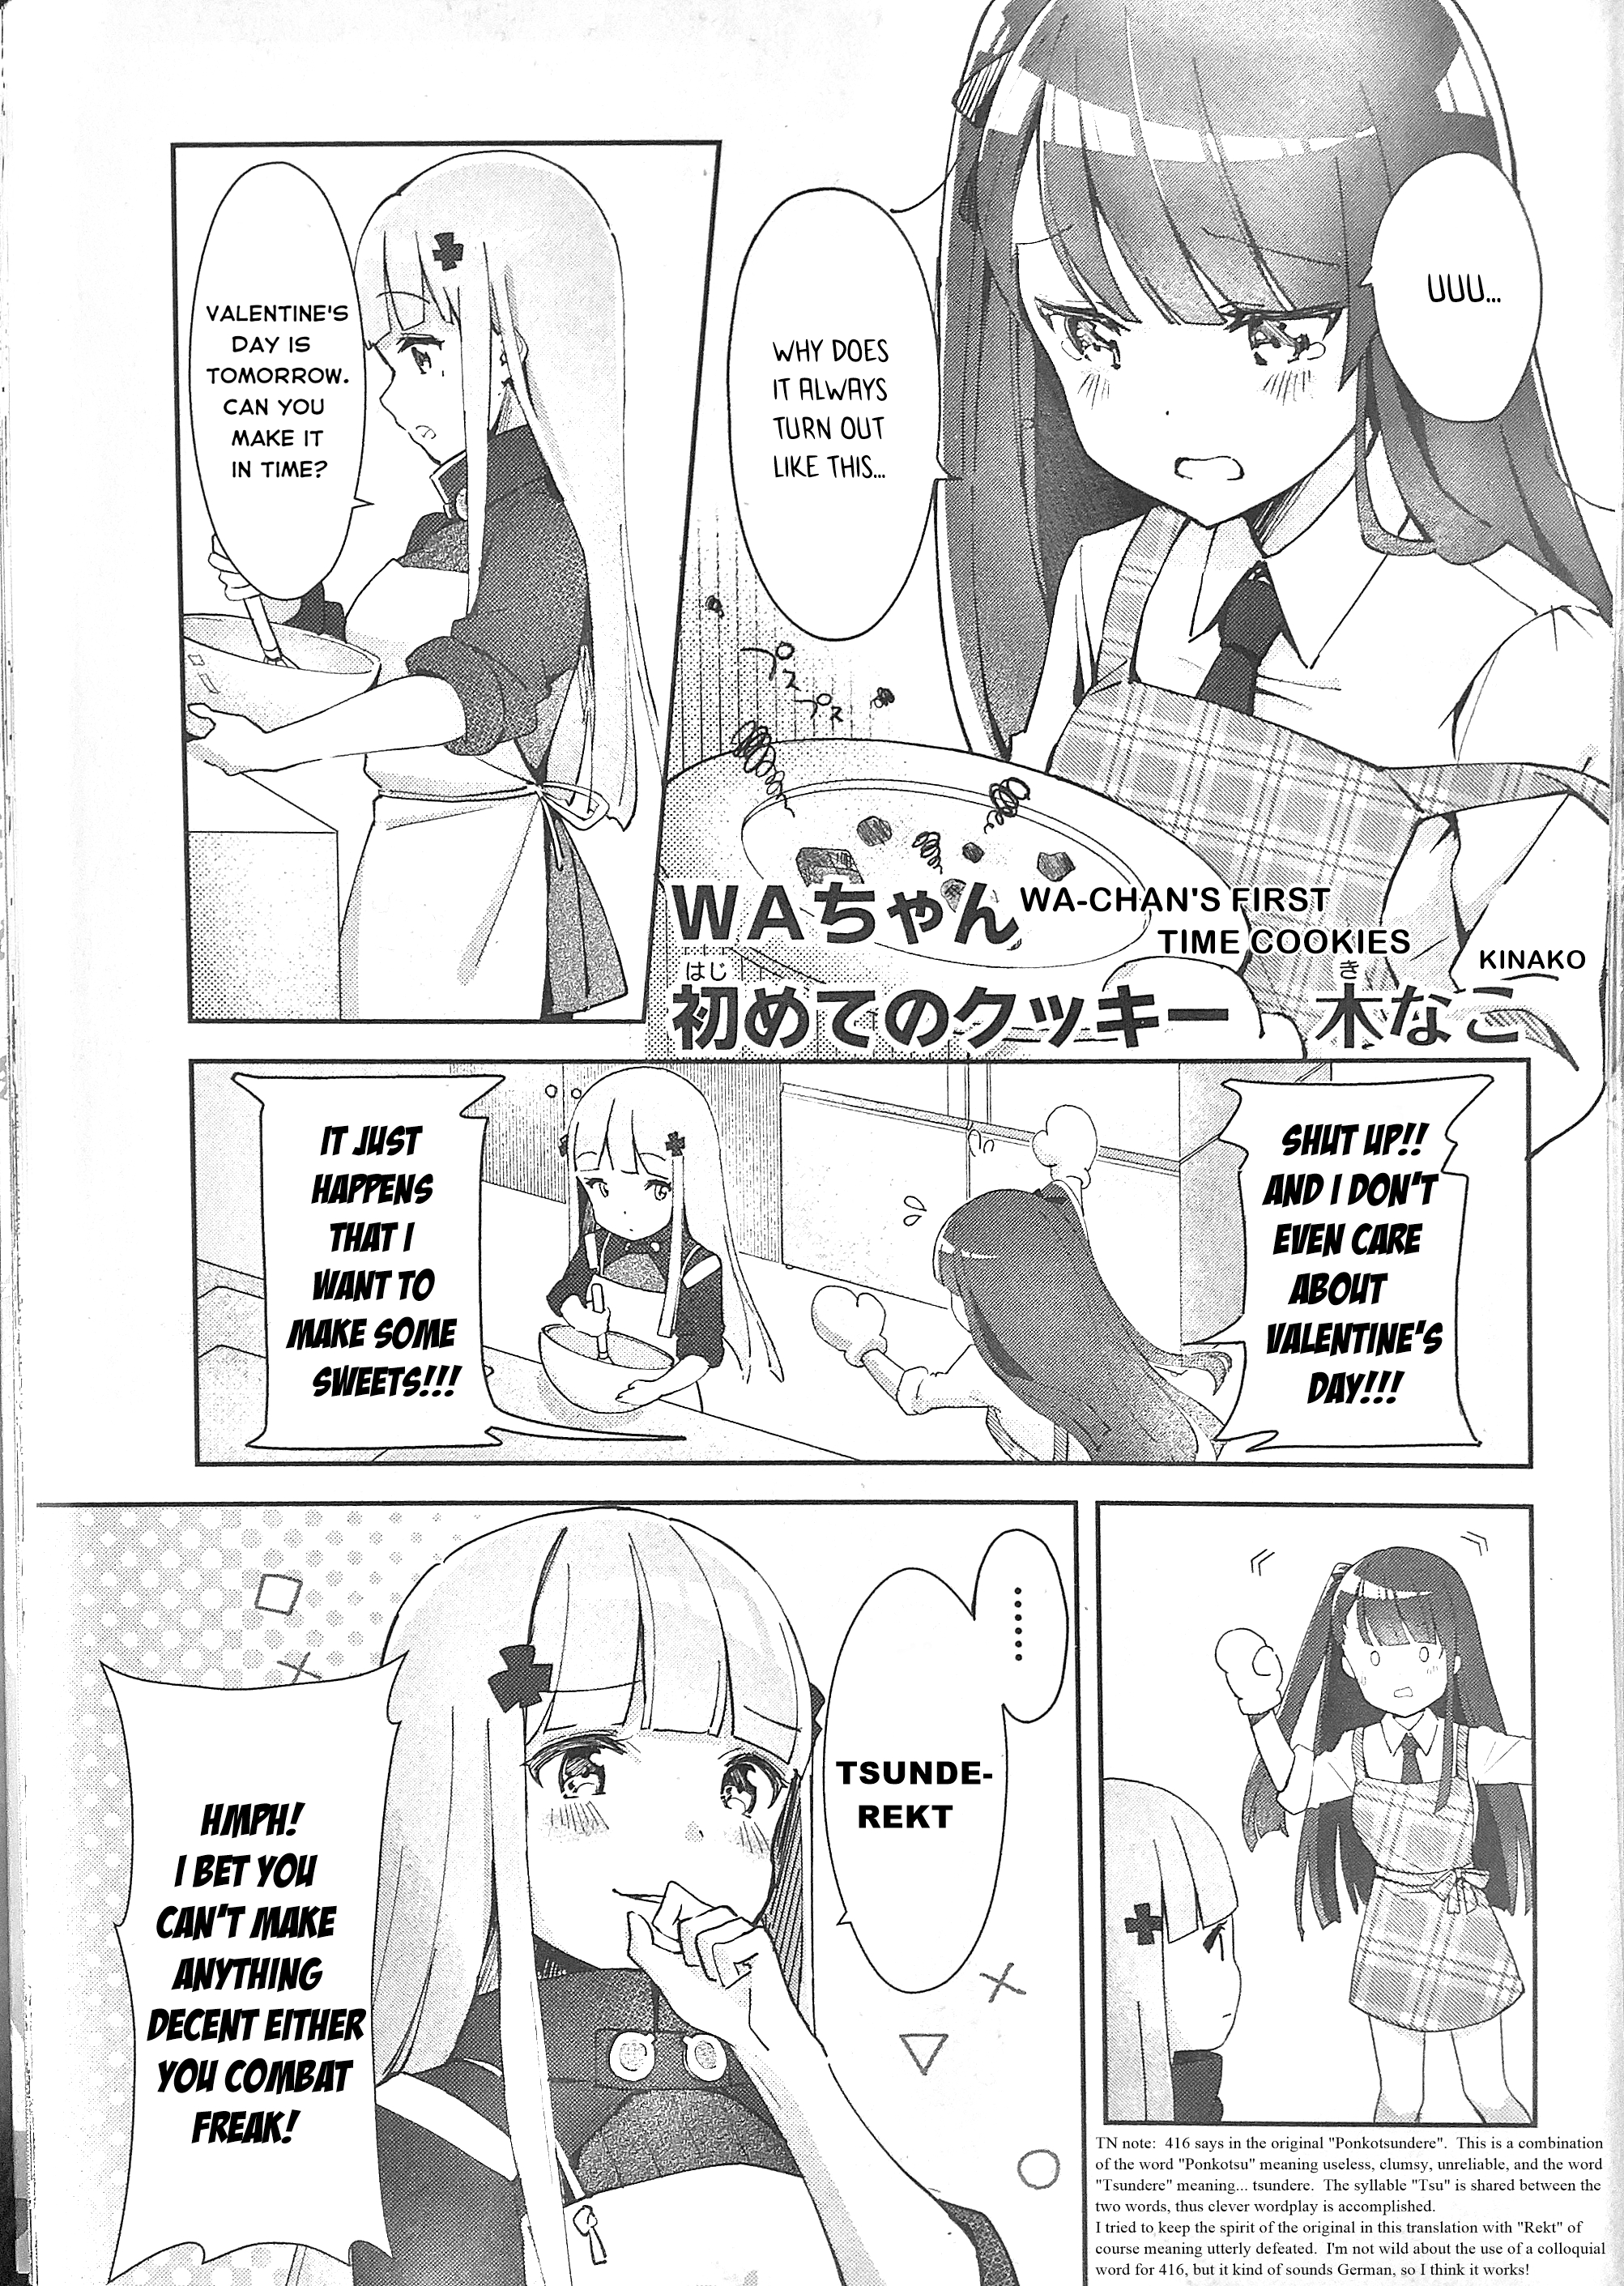 Dolls Frontline Comic Anthology - DNA Media 2019 - Chapter 14954 - WA-chan's First-time Cookies! - Image 1